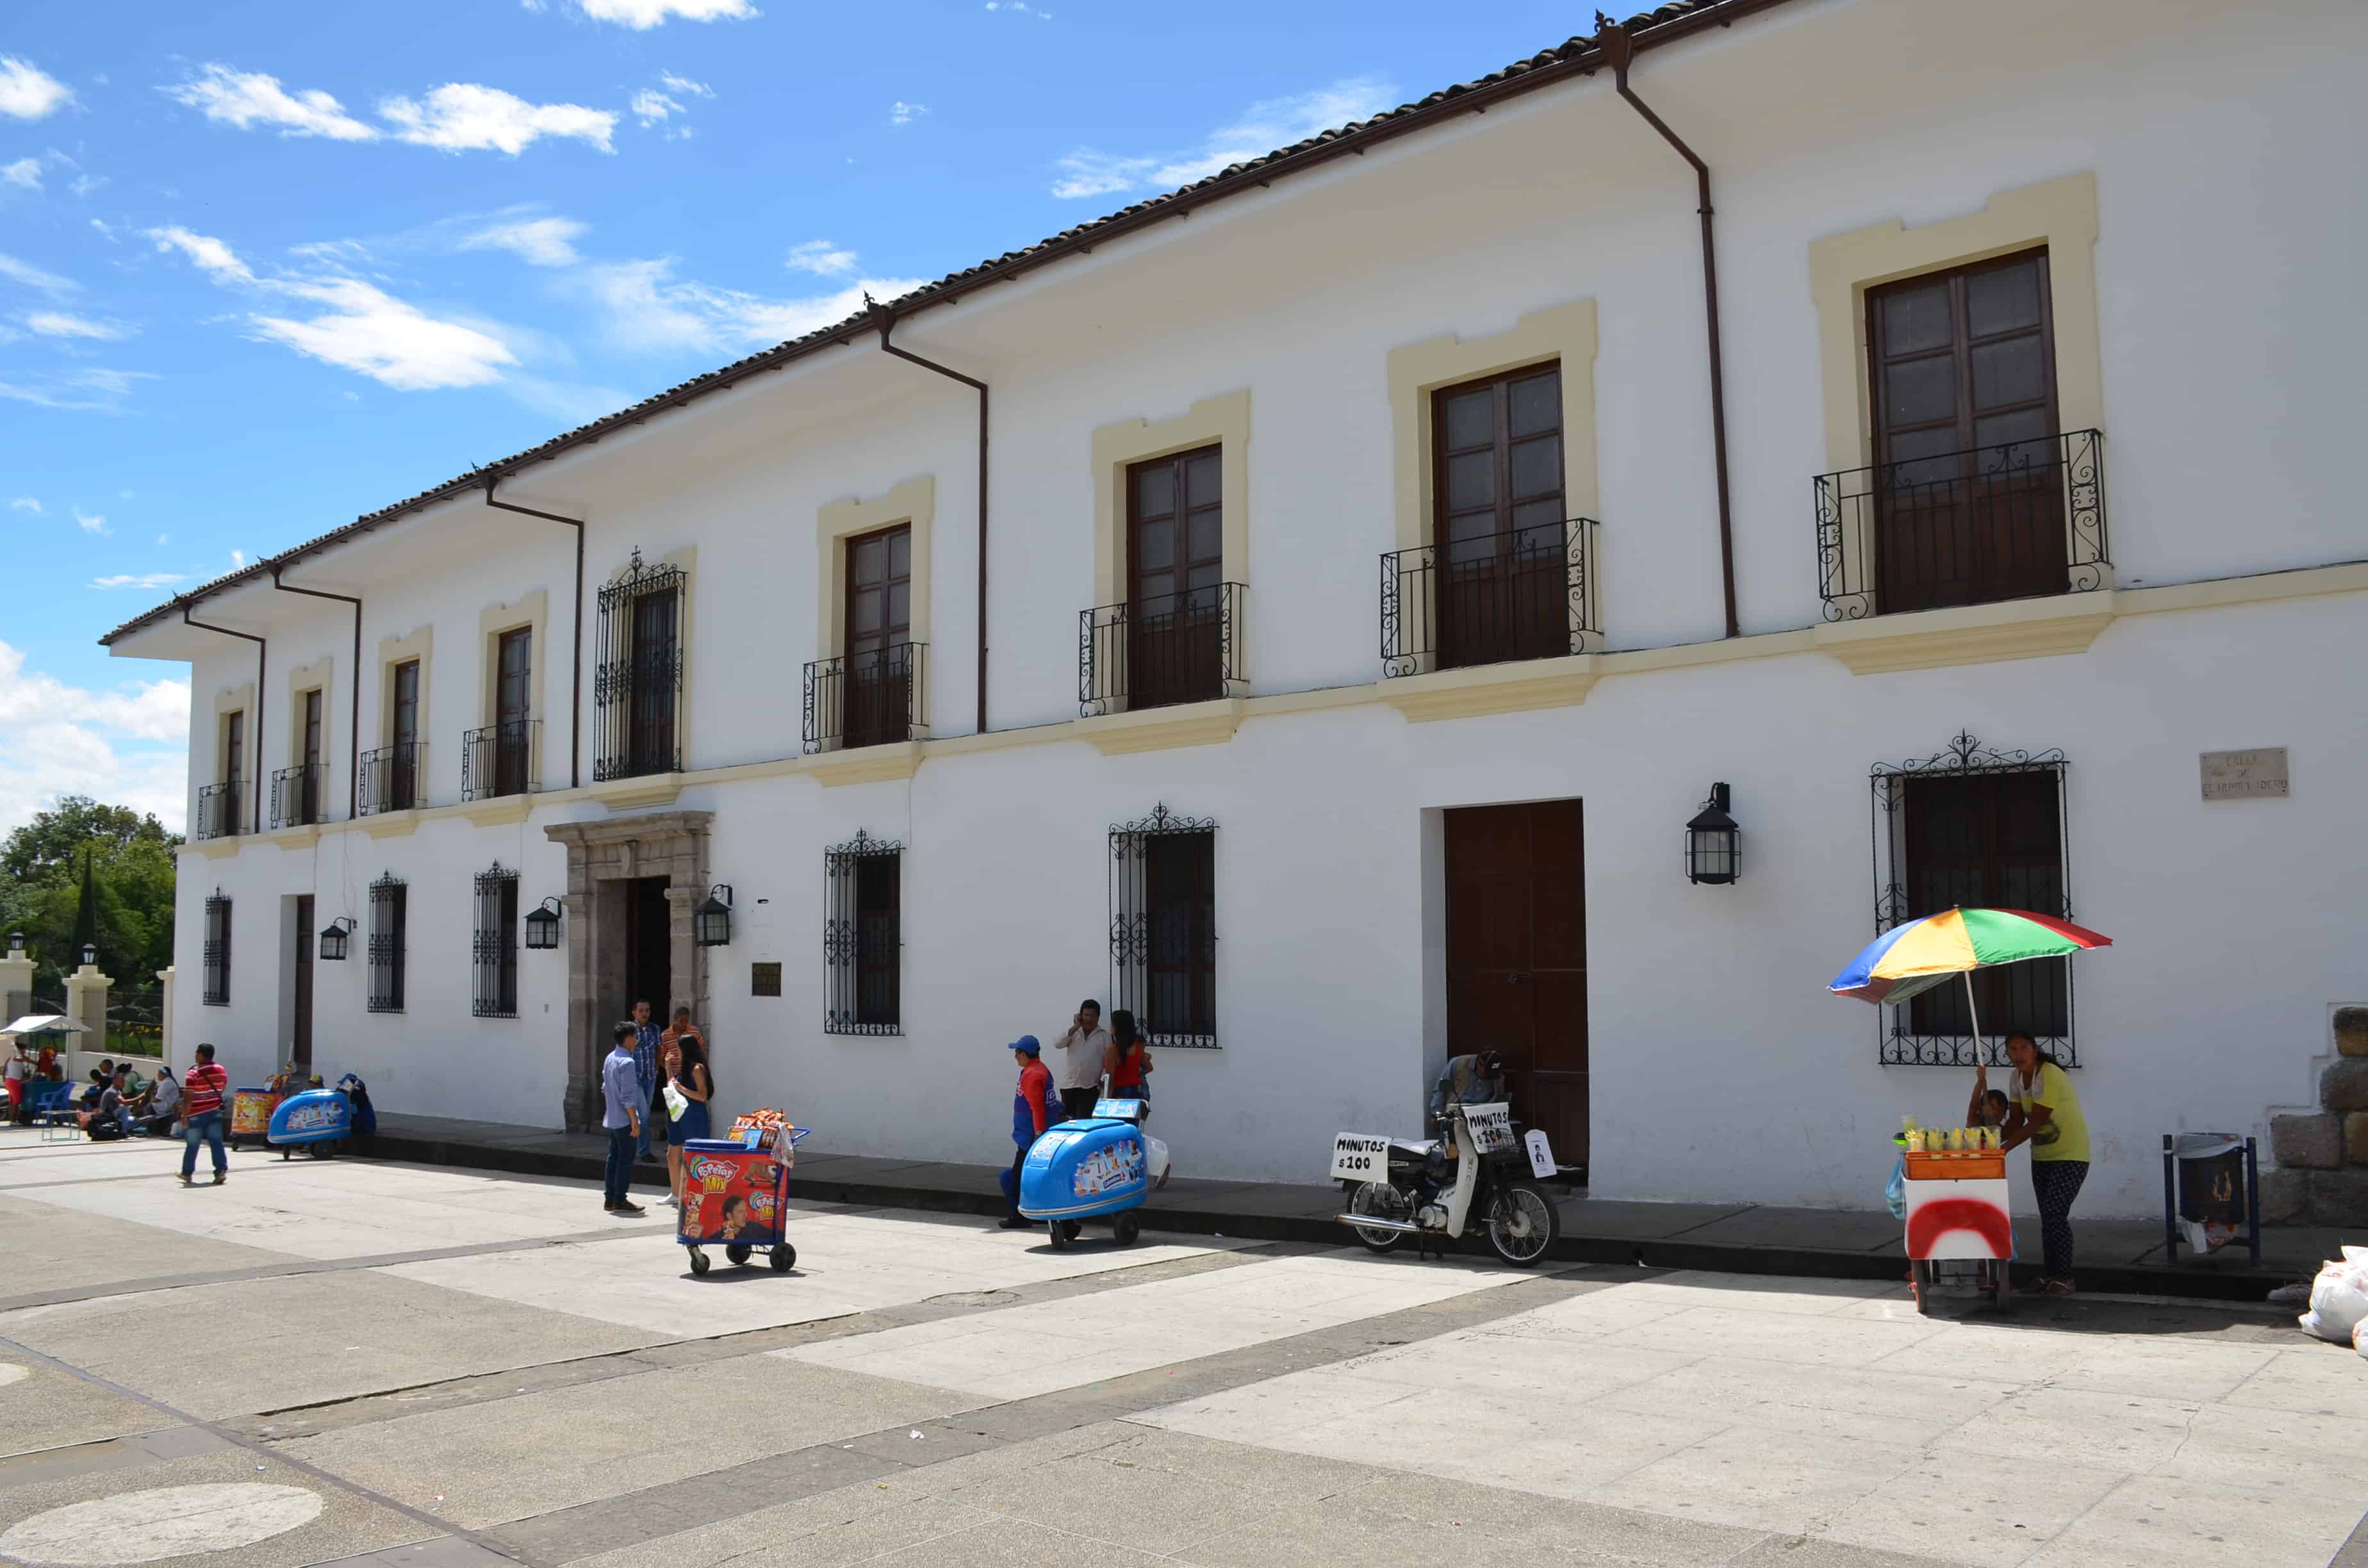 Guillermo Valencia National Museum in Popayán, Cauca, Colombia